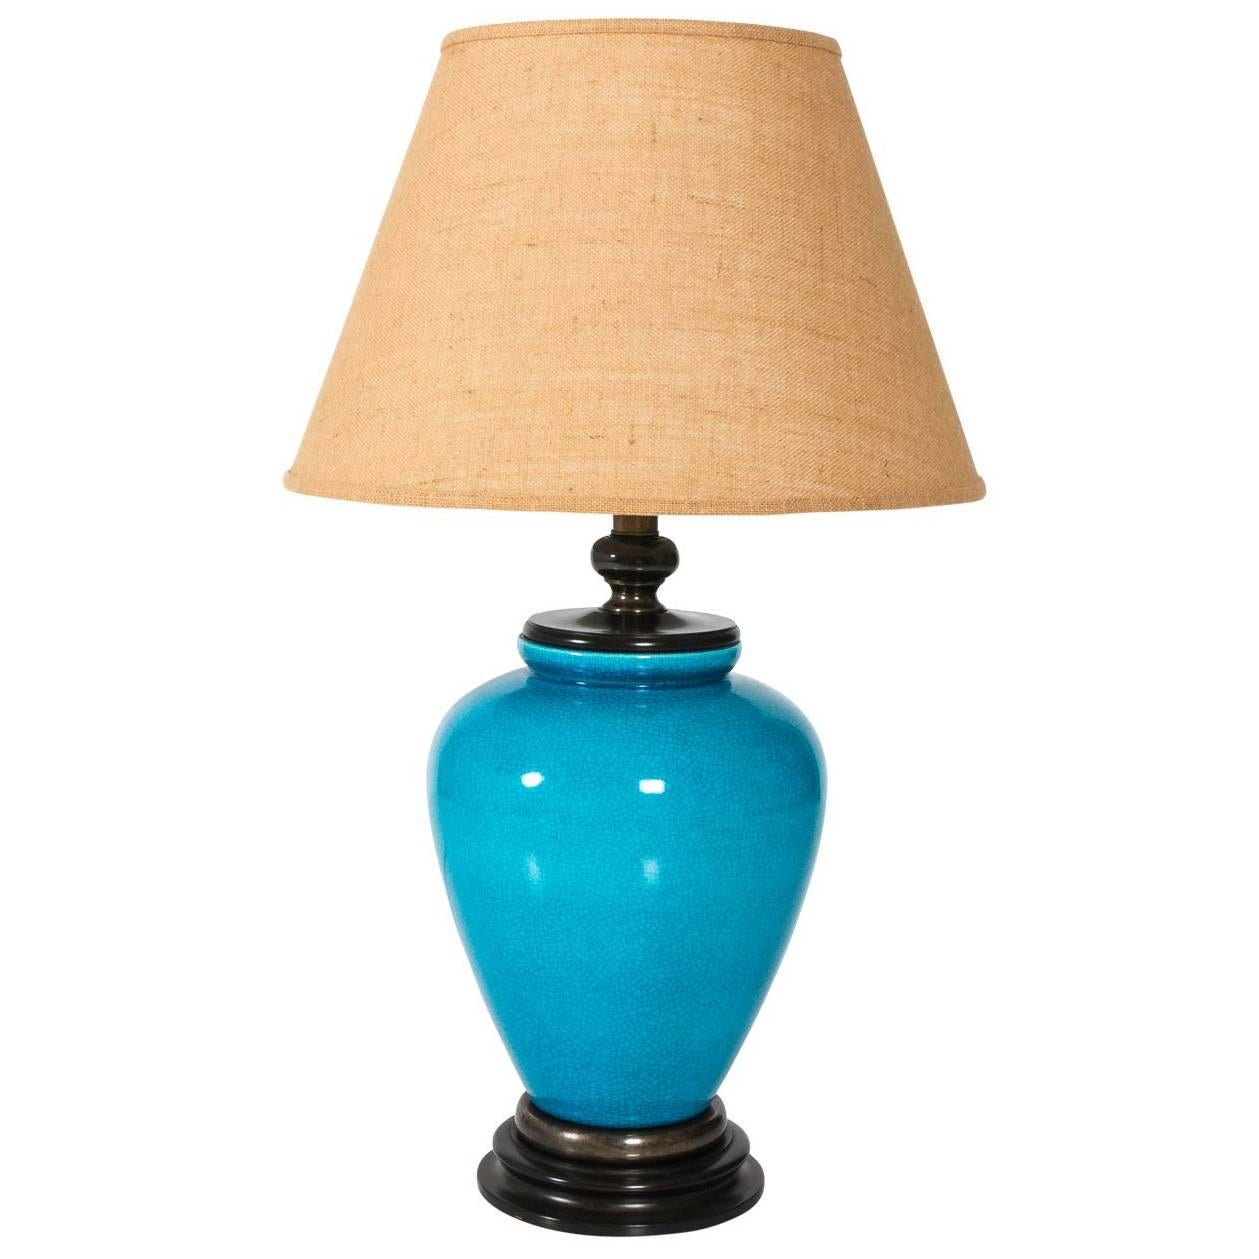 Large Midcentury Table Lamp